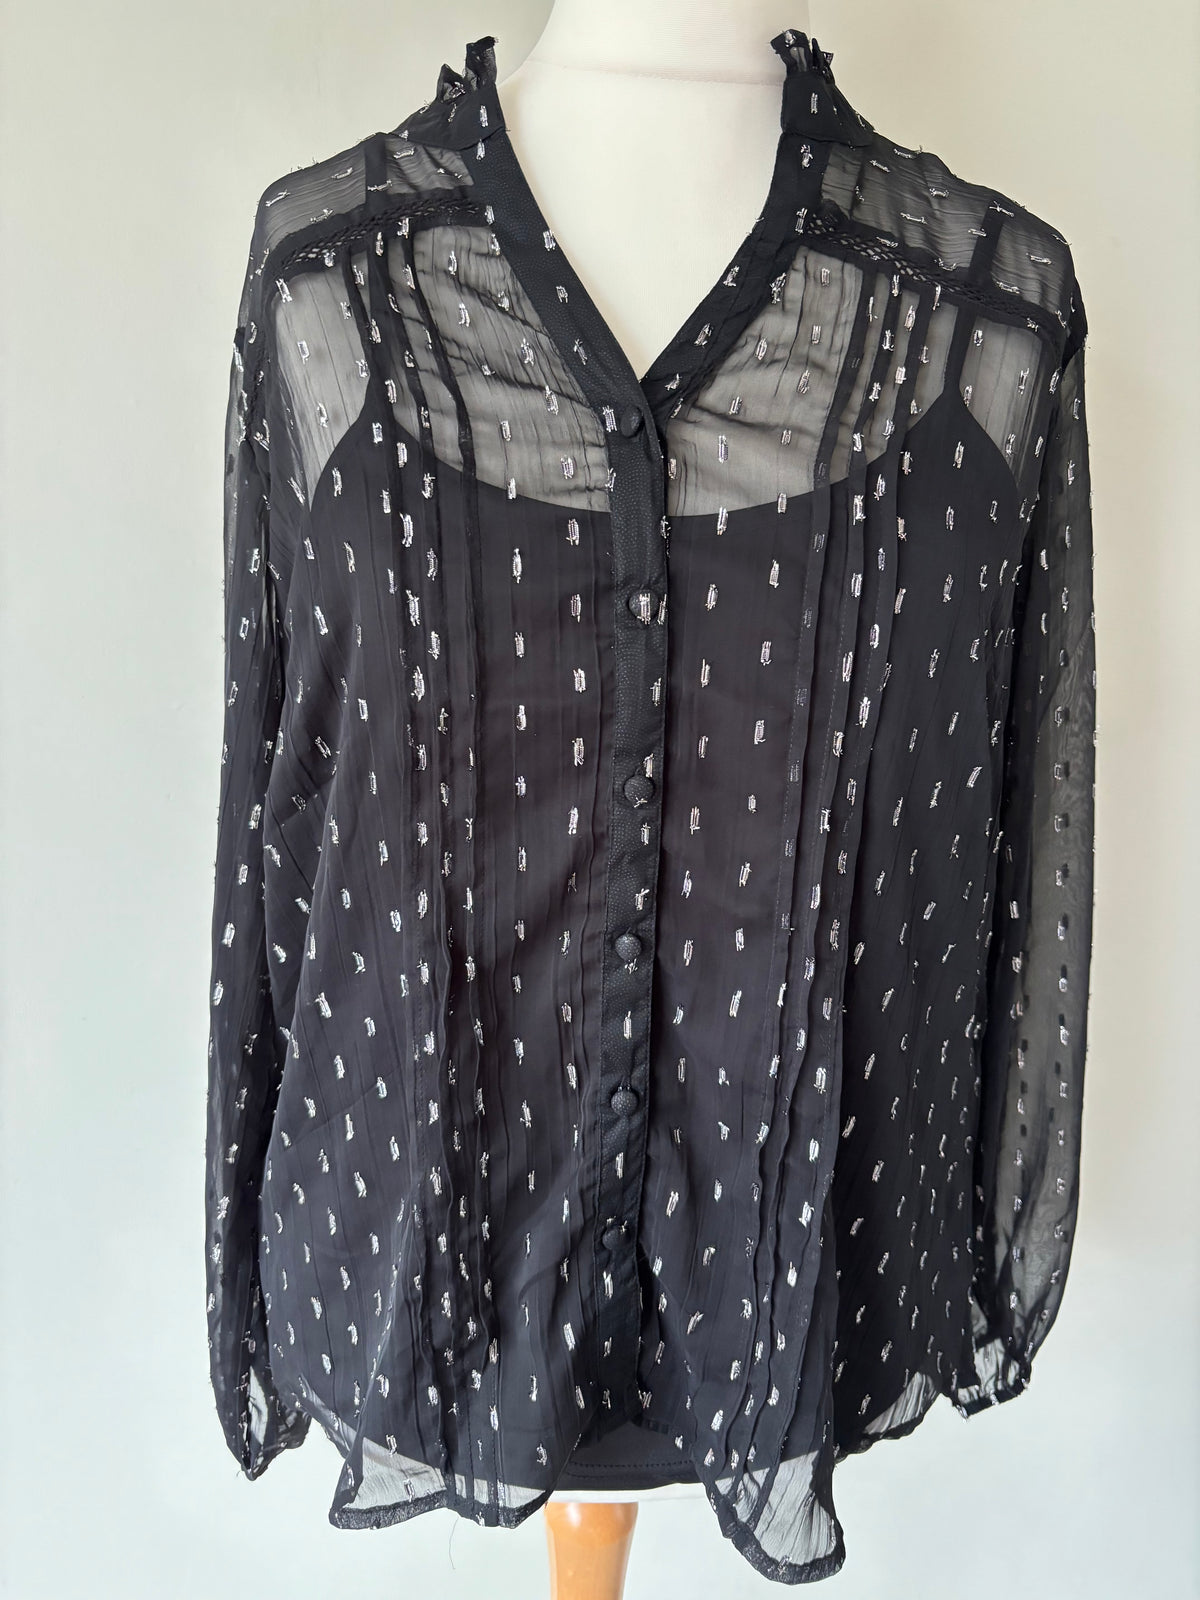 Sheer top with Vest by Joe Browns Size 16